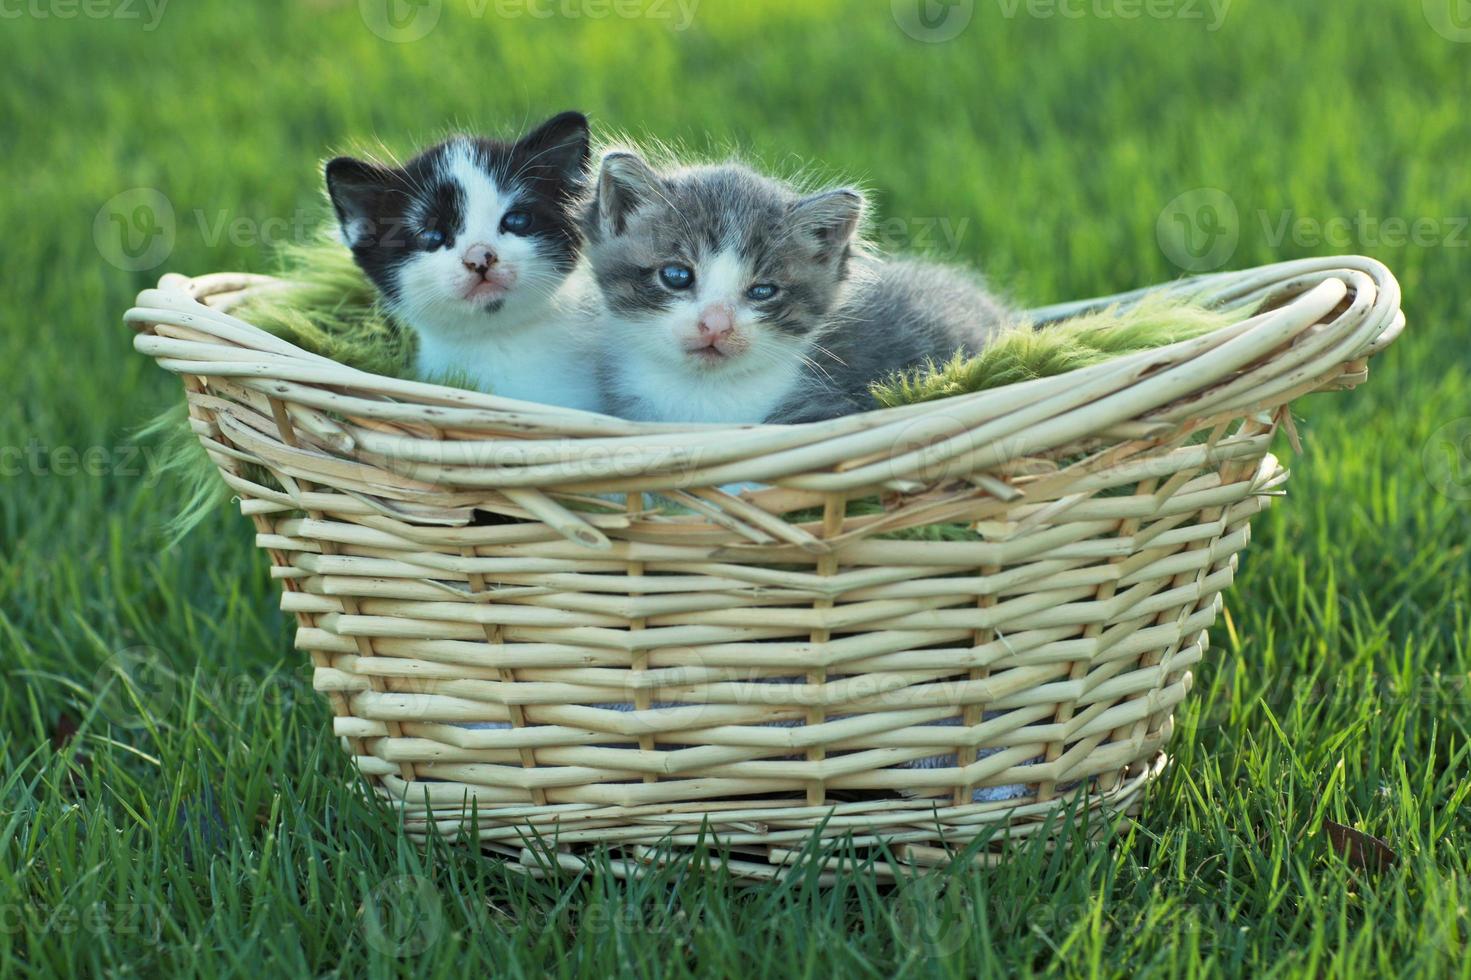 Kittens Outdoors in Natural Light photo